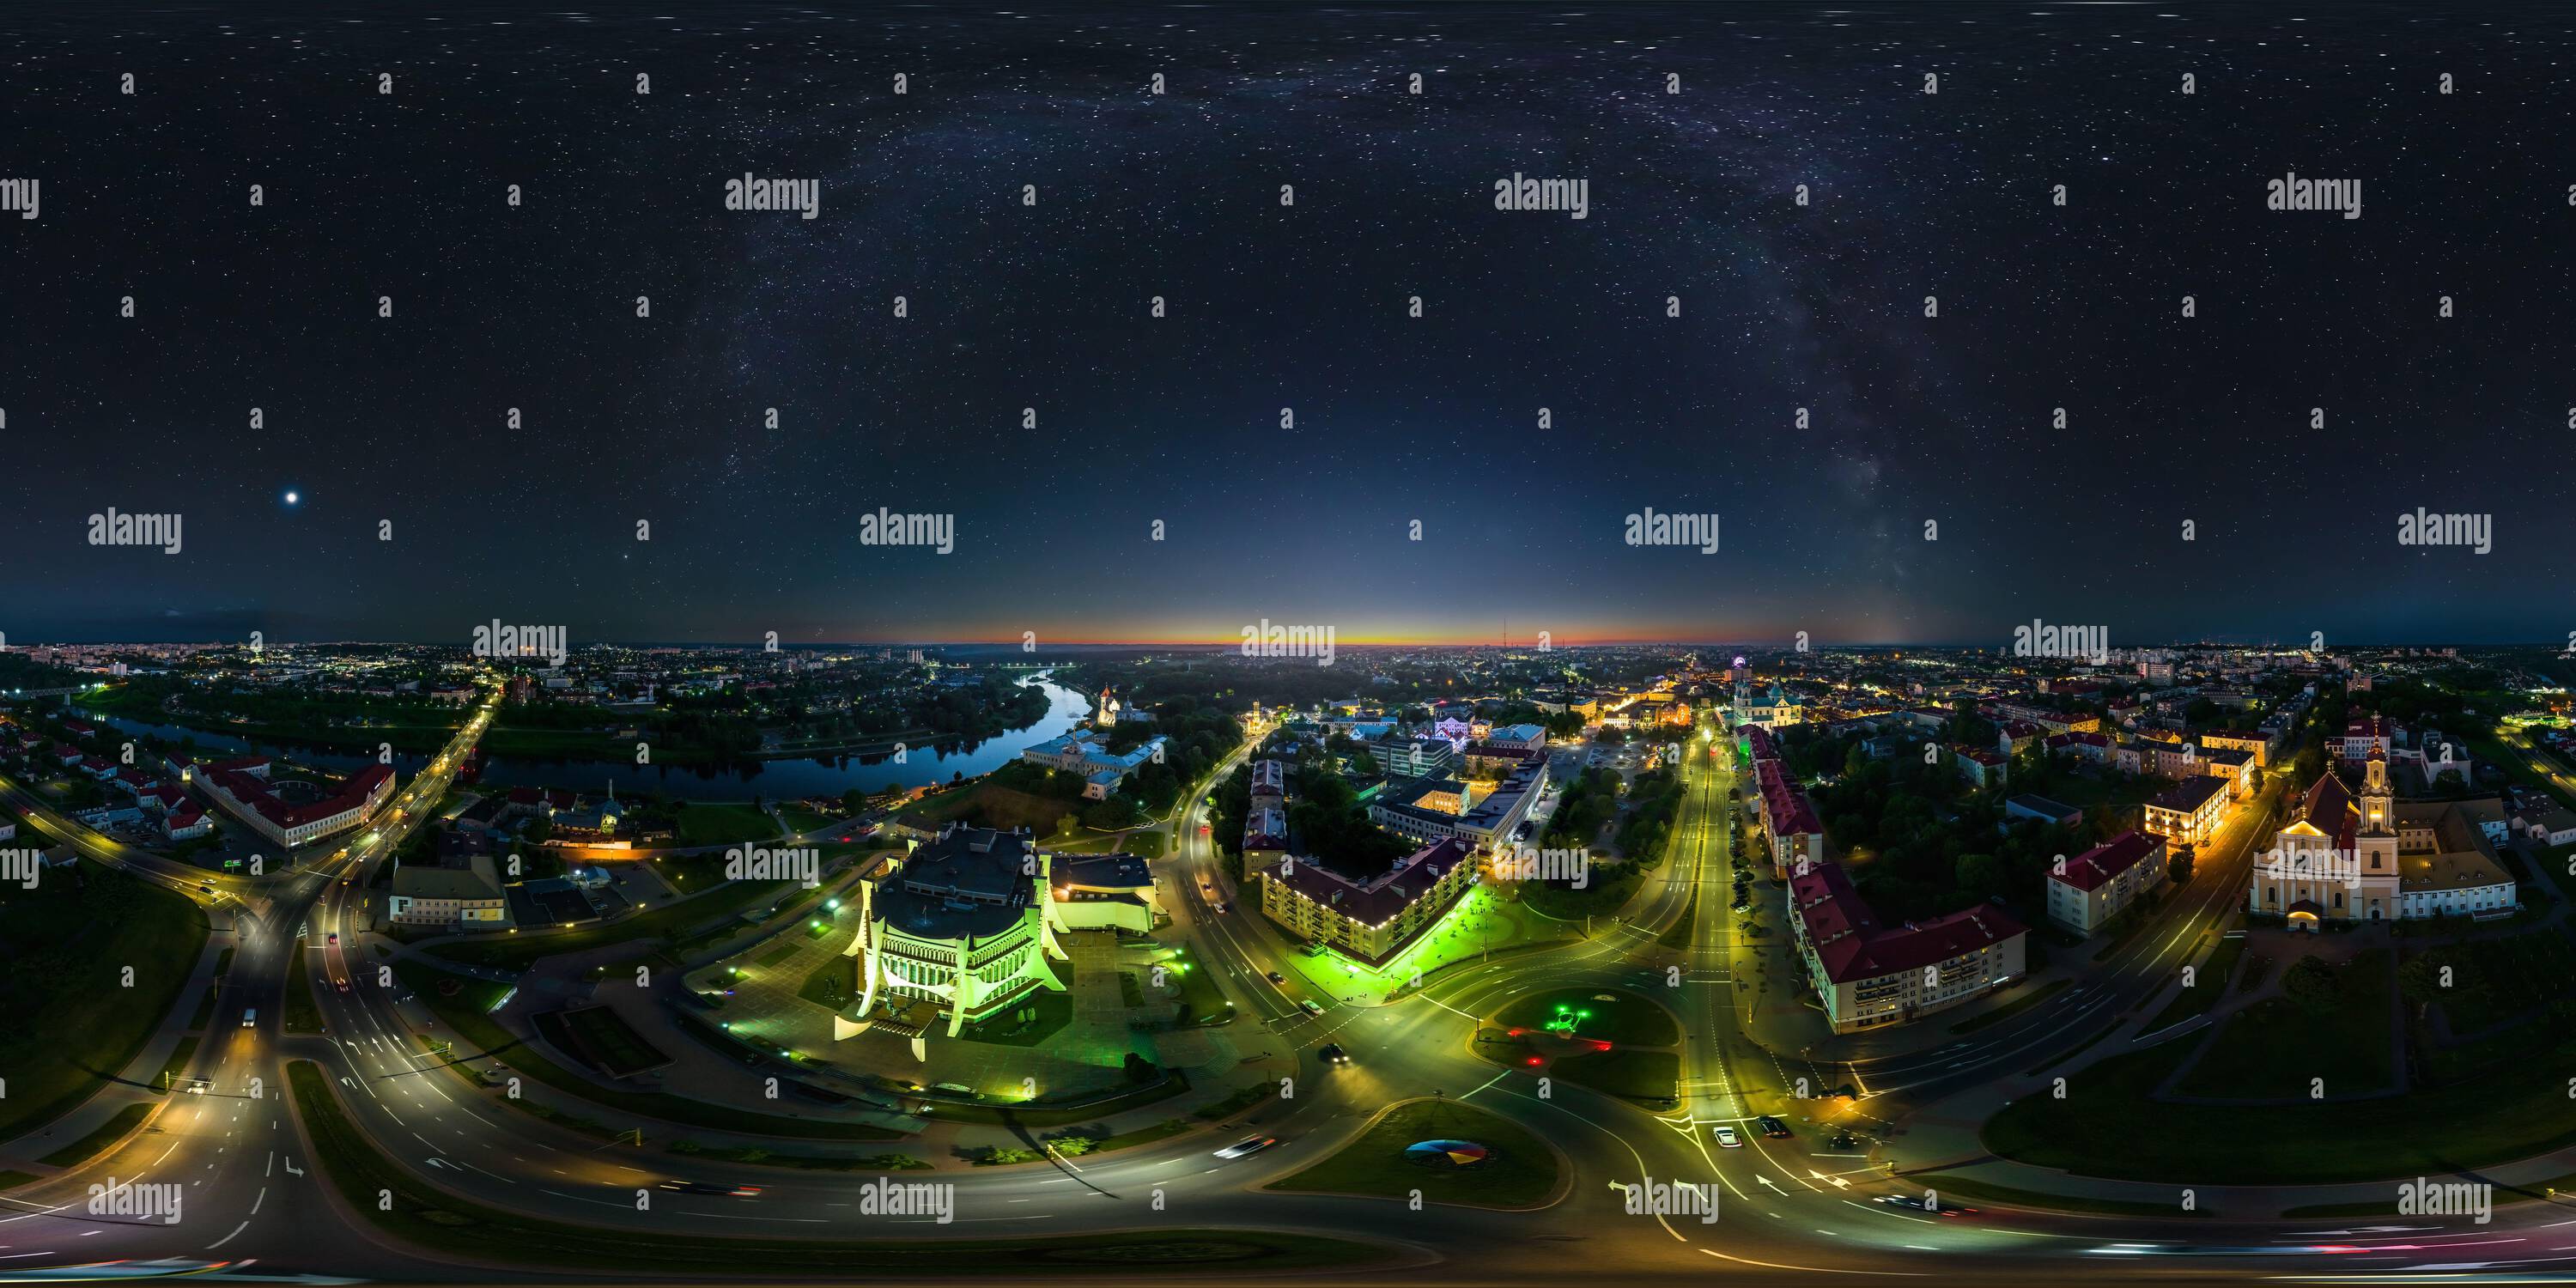 360 degree panoramic view of aerial seamless spherical 360 night panorama overlooking old town, urban development, historic buildings, crossroads with bridge across river with sta